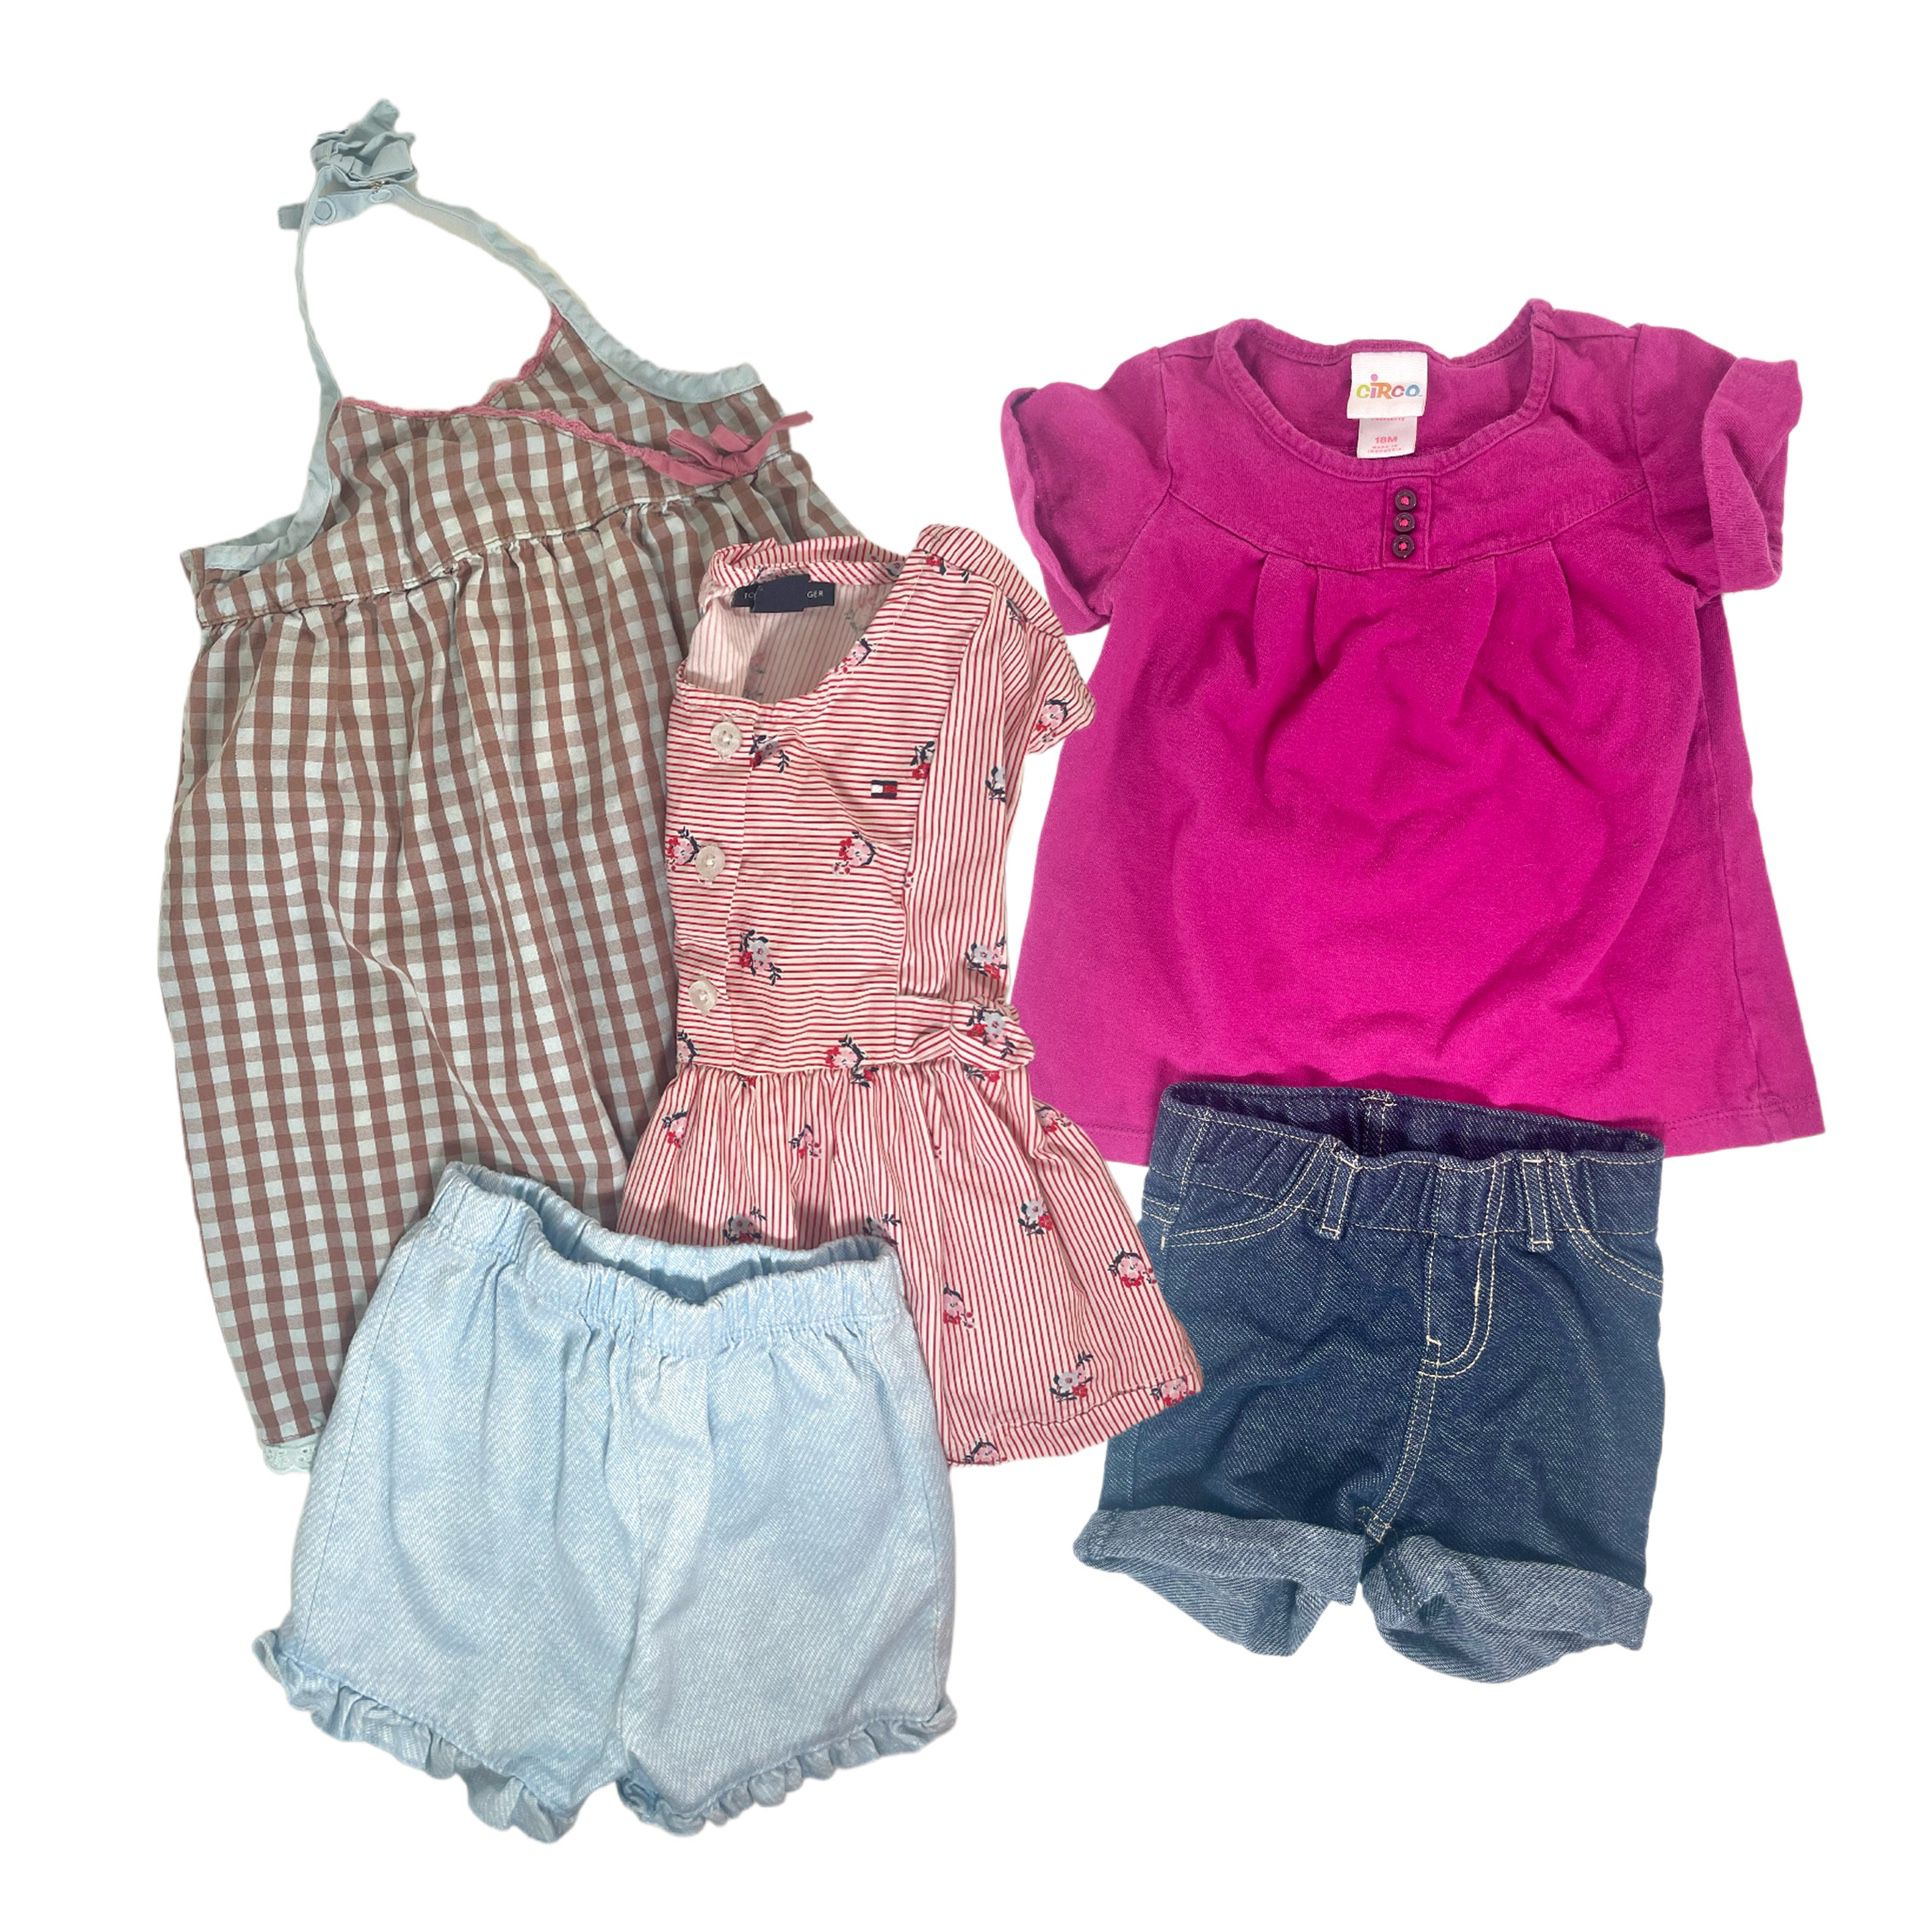 Baby Toddler Girls 18 Months 9 Piece Bundle Tops, Bottoms, Dresses, Jeans